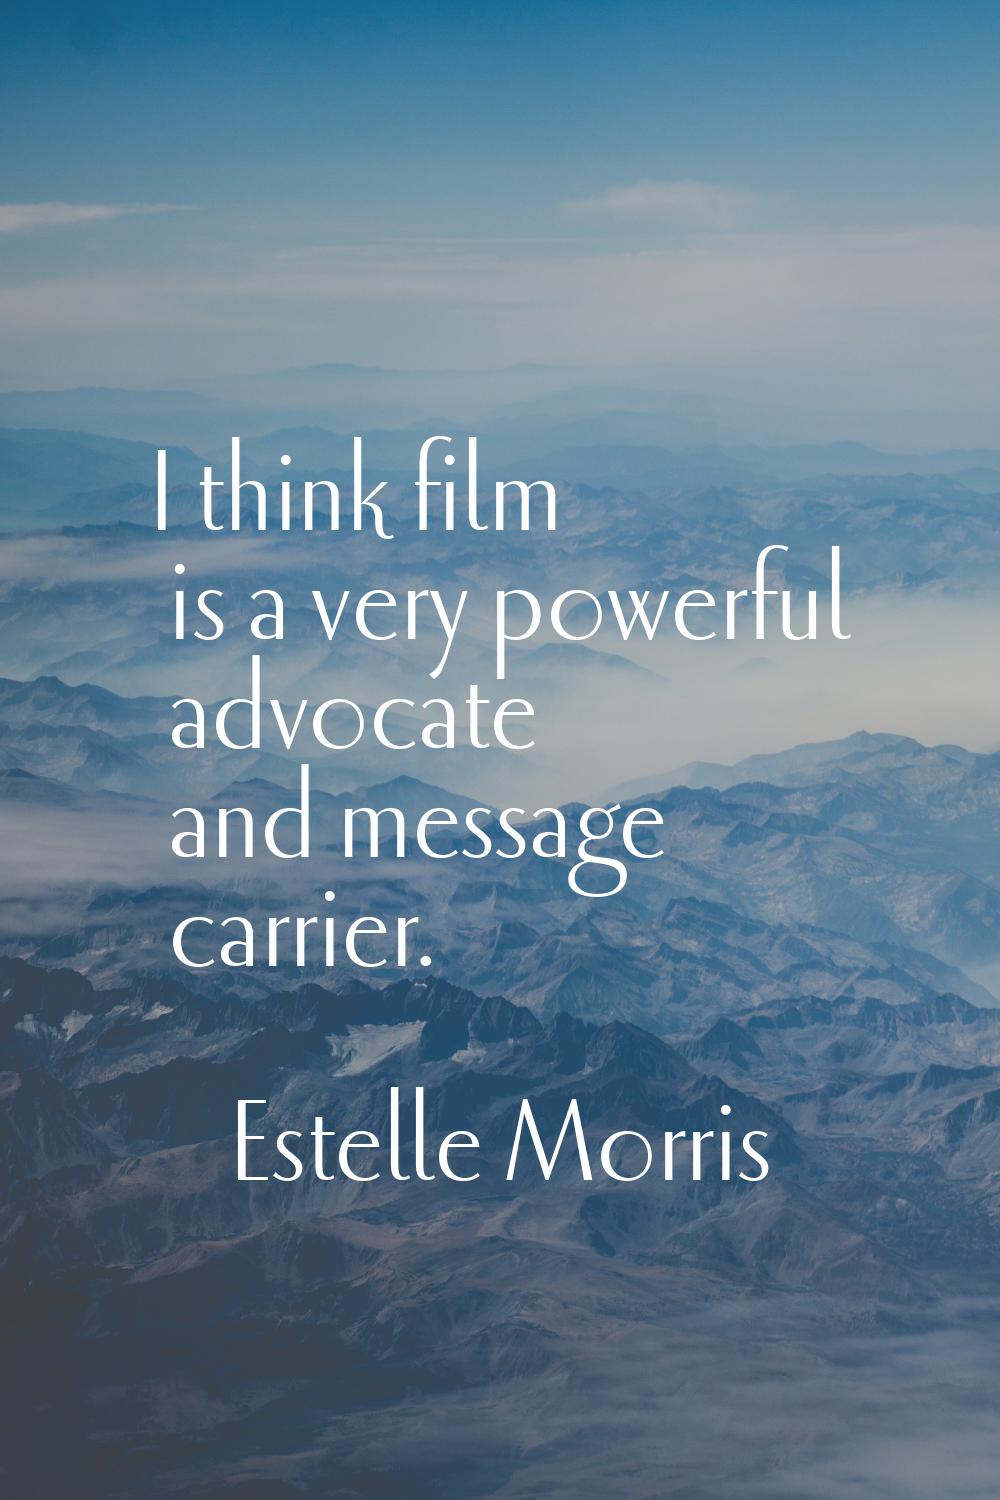 I think film is a very powerful advocate and message carrier.